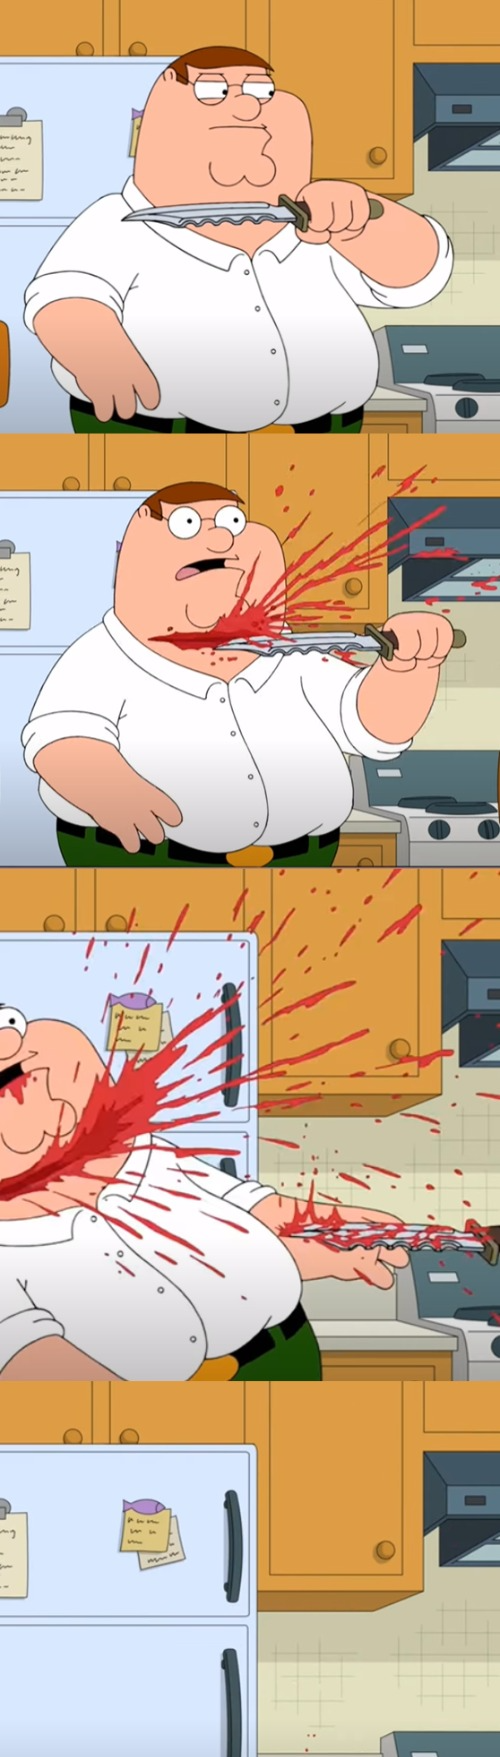 Peter Cutting His Neck Blank Meme Template